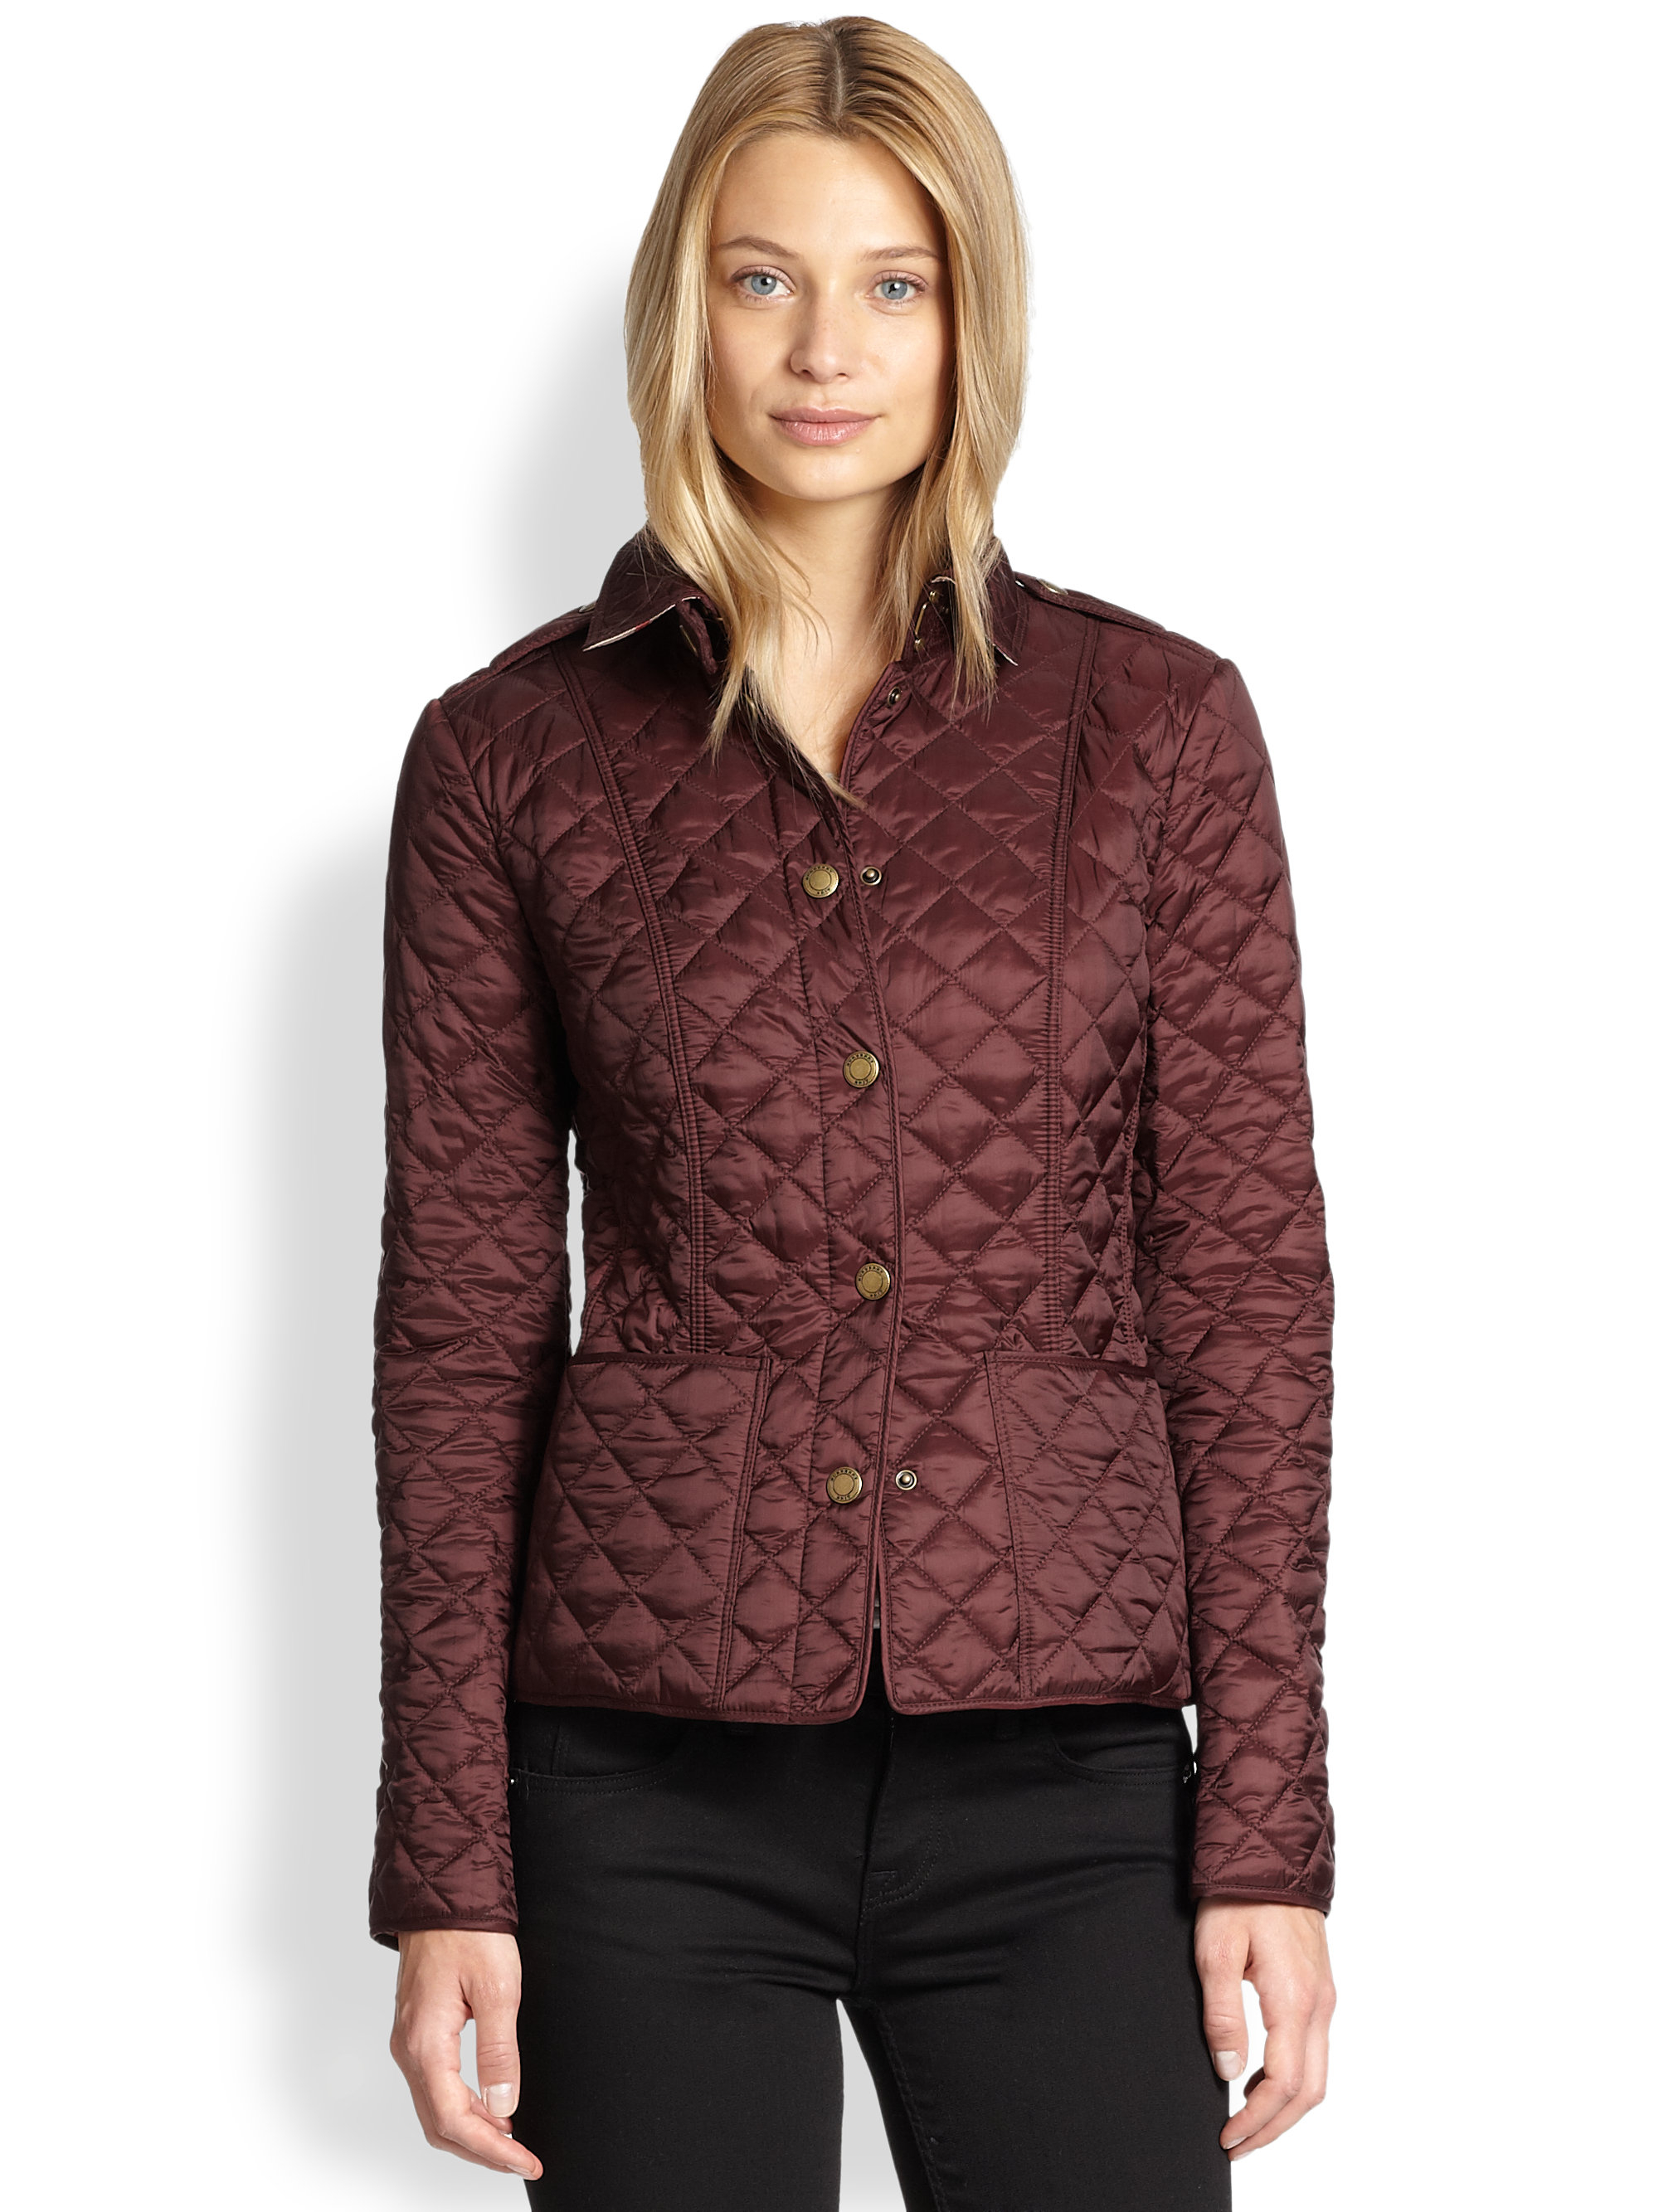 Lyst - Burberry Brit Quilted Nylon Jacket in Purple